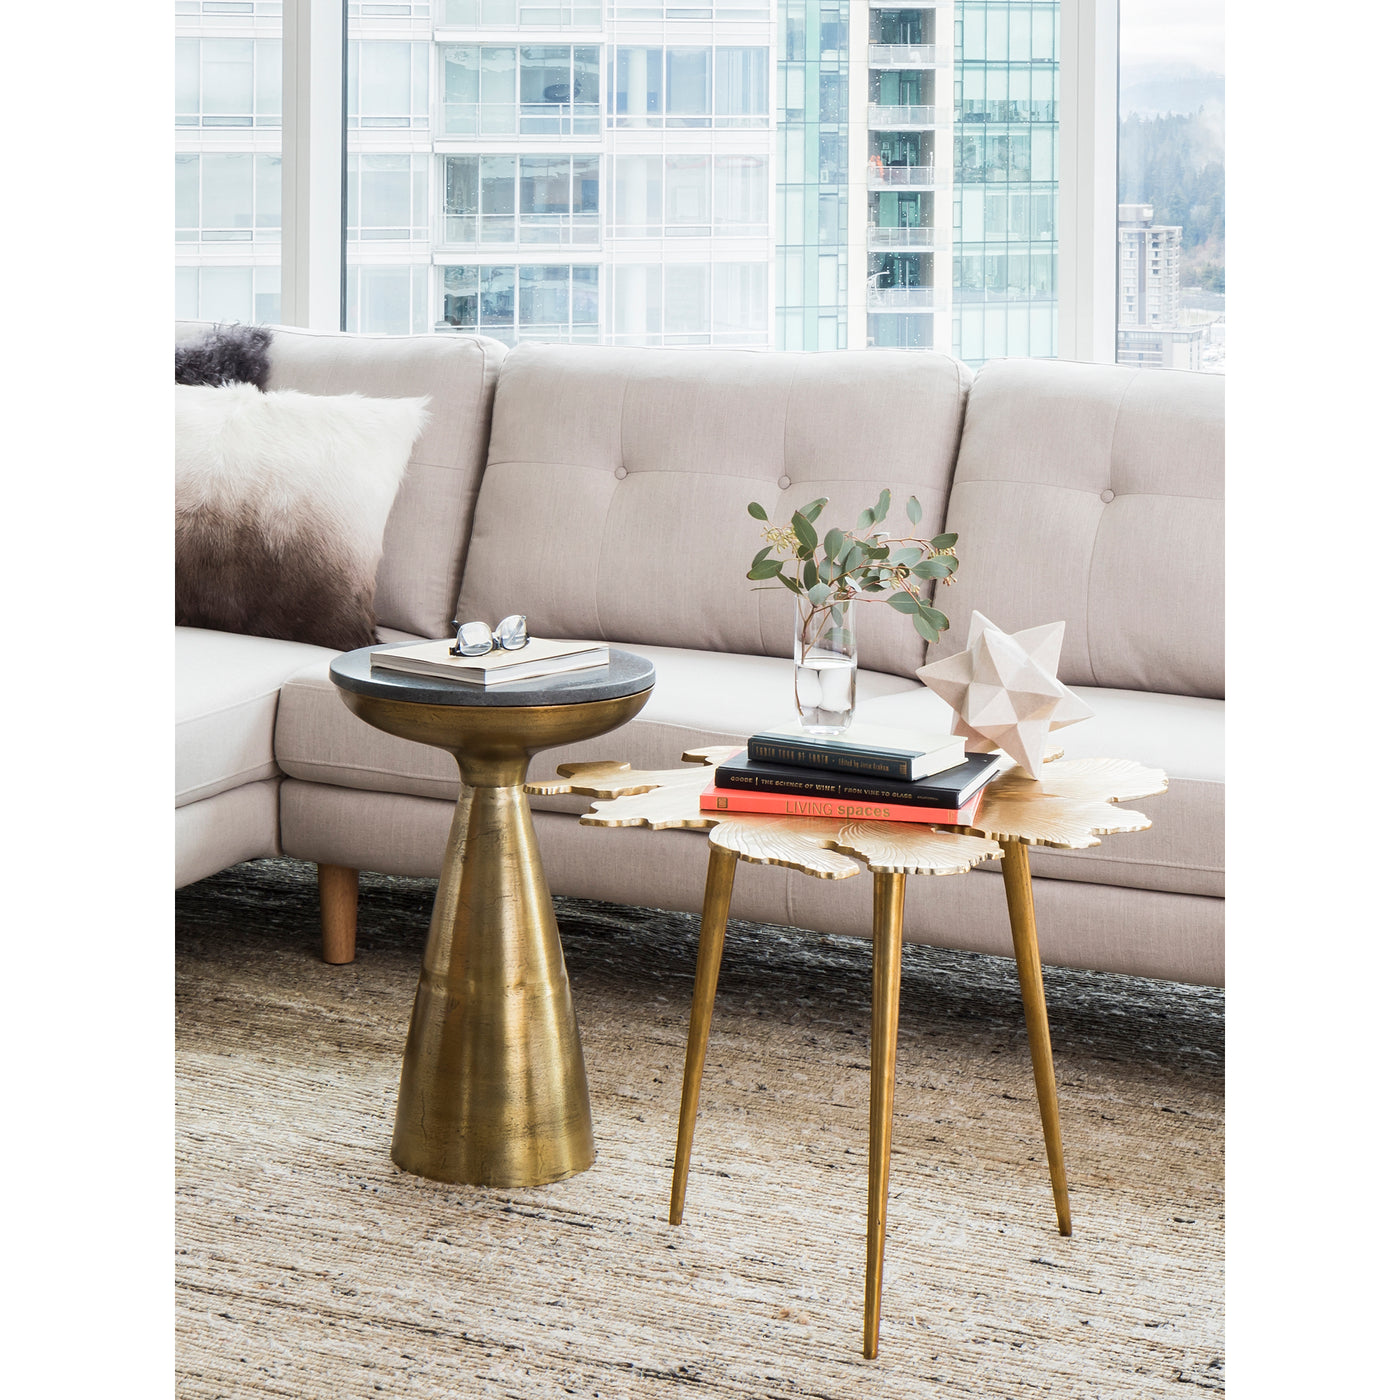 The most organic shape of all meets fresh contemporary style. The art deco inspired Amoeba side table features a truly uni...